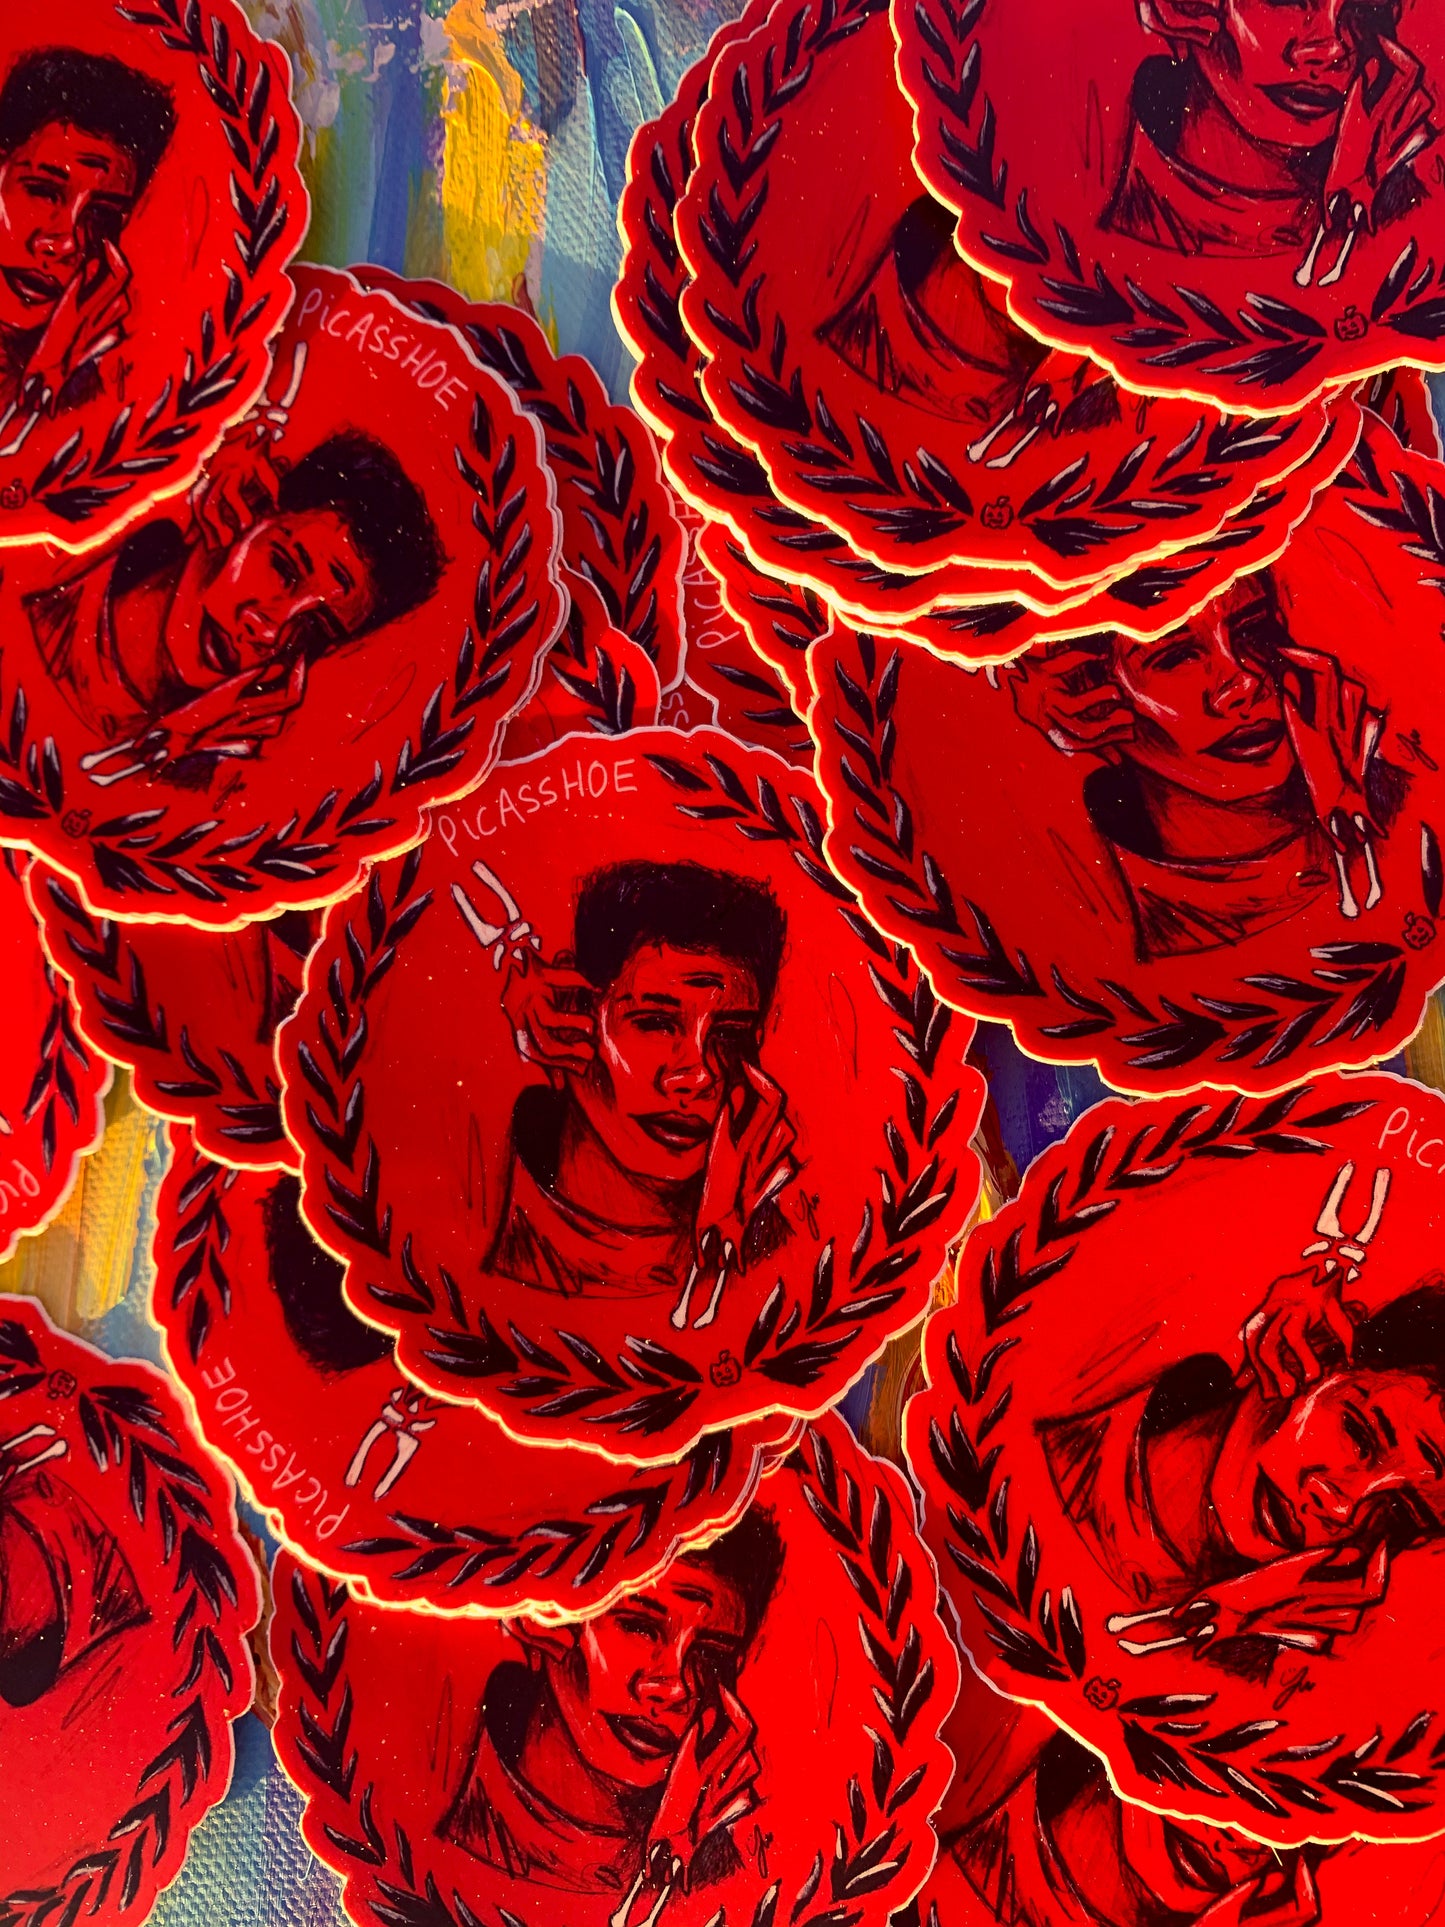 Blood Moon Sticker - Picasshoe Clothing